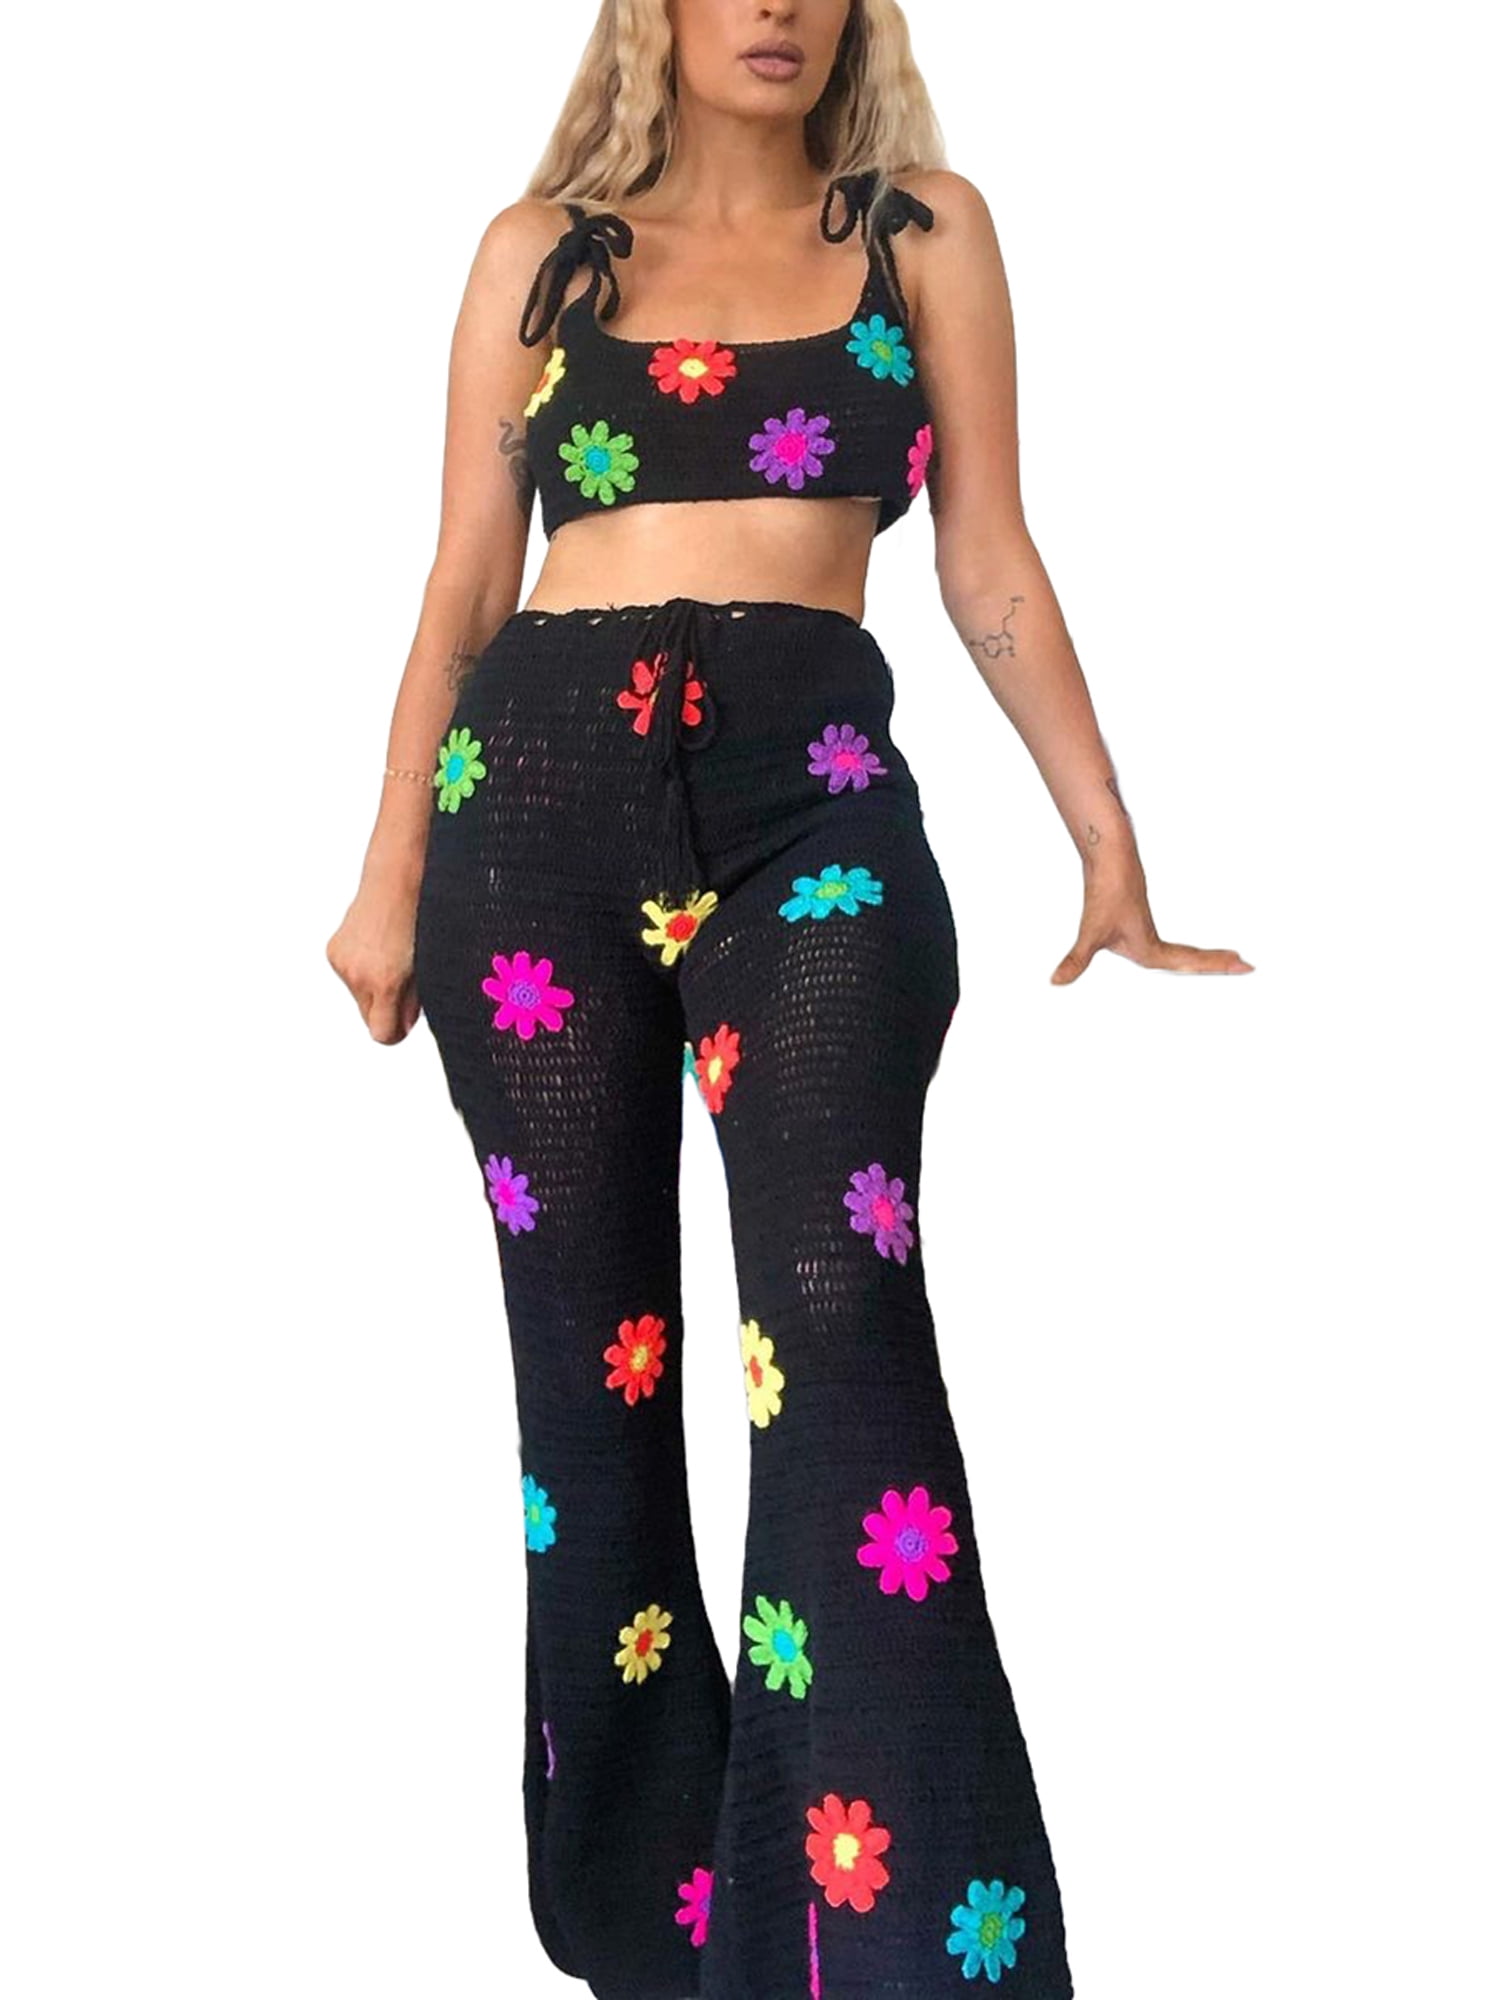 Flower Power Floral Flare Pants  Funky outfits, Hippie outfits, Funky pants